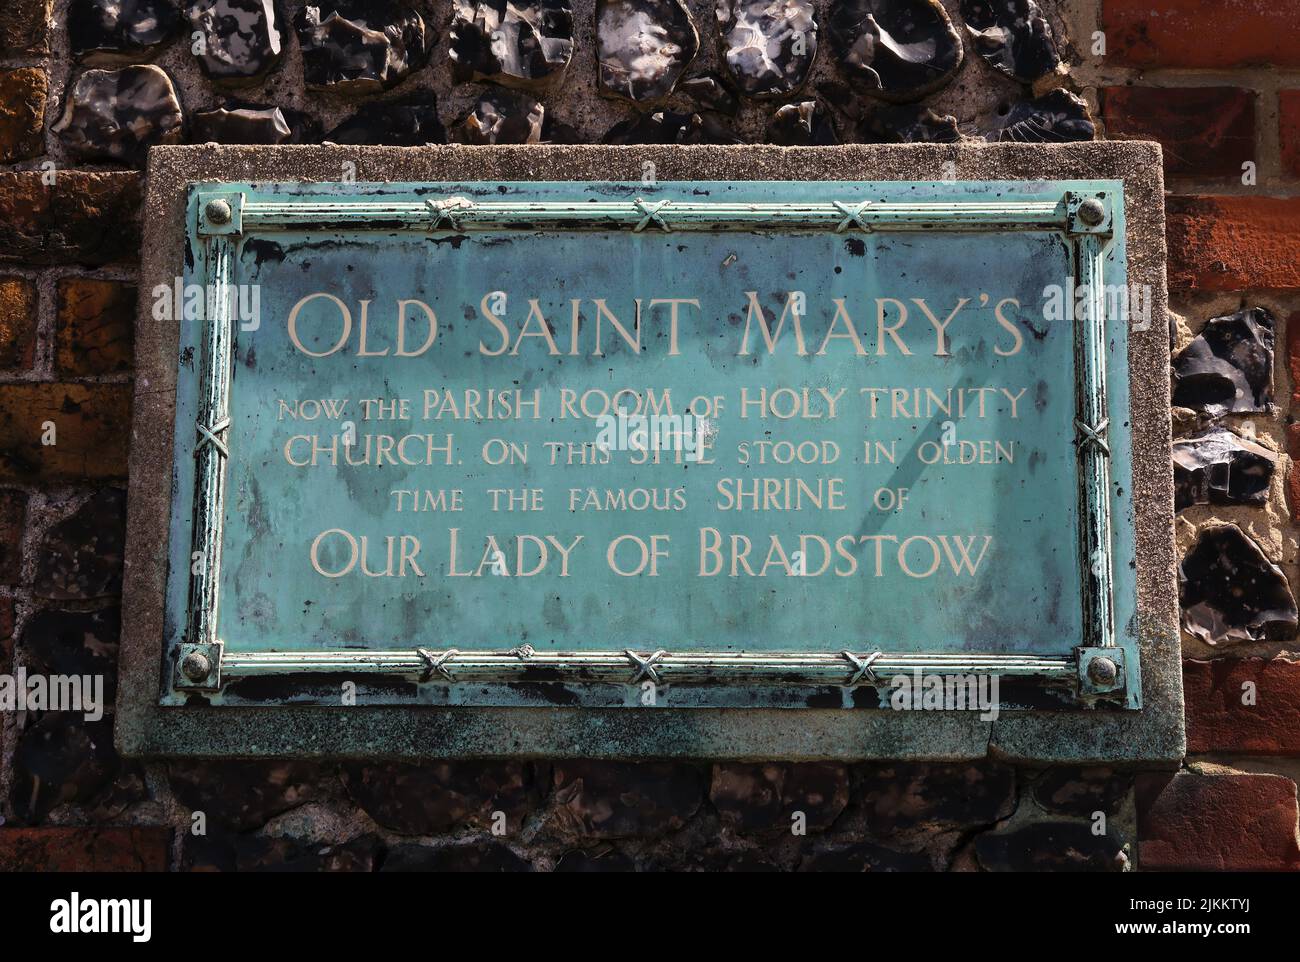 Stone marking the site where the Shrine to Our Lady of Bradstow once stood in olden times, now converted to a pub, in Broadstairs, Isle of Thanet, UK Stock Photo